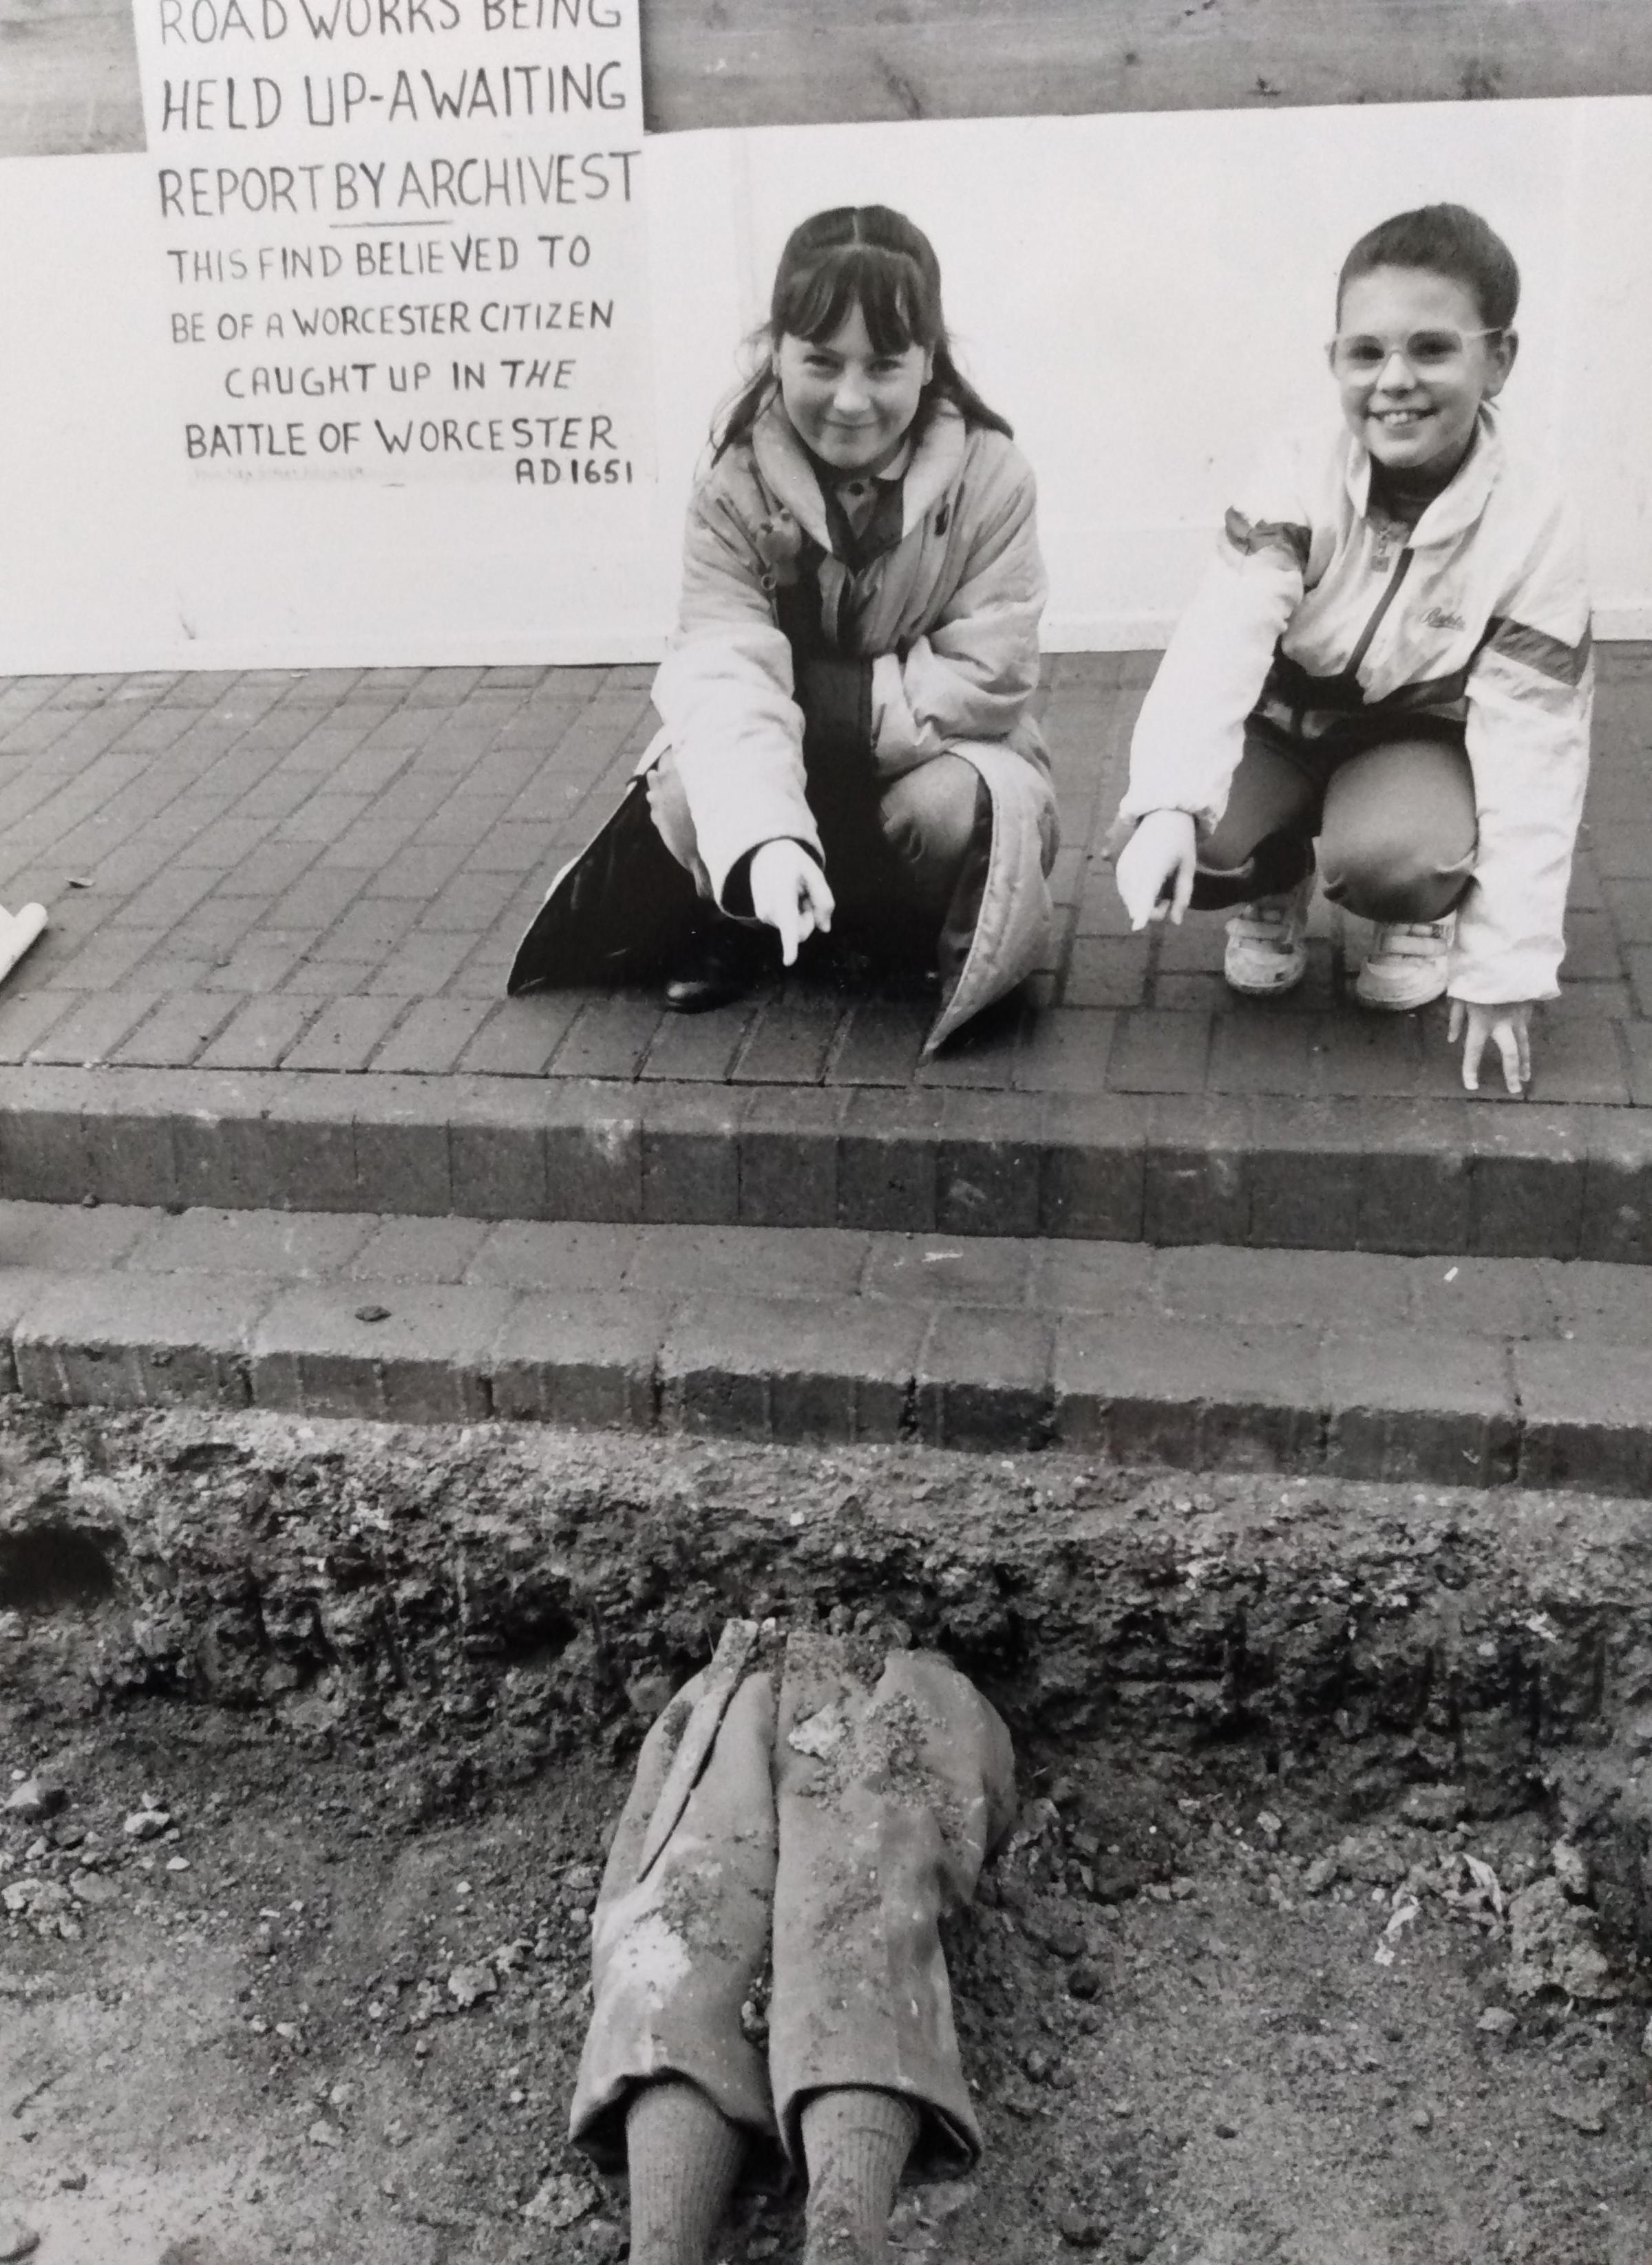 Rebecca Cole, left, and Katie Box with a pair of legs left by a prankster during roadworks in March 1992. Turn inside for the full story